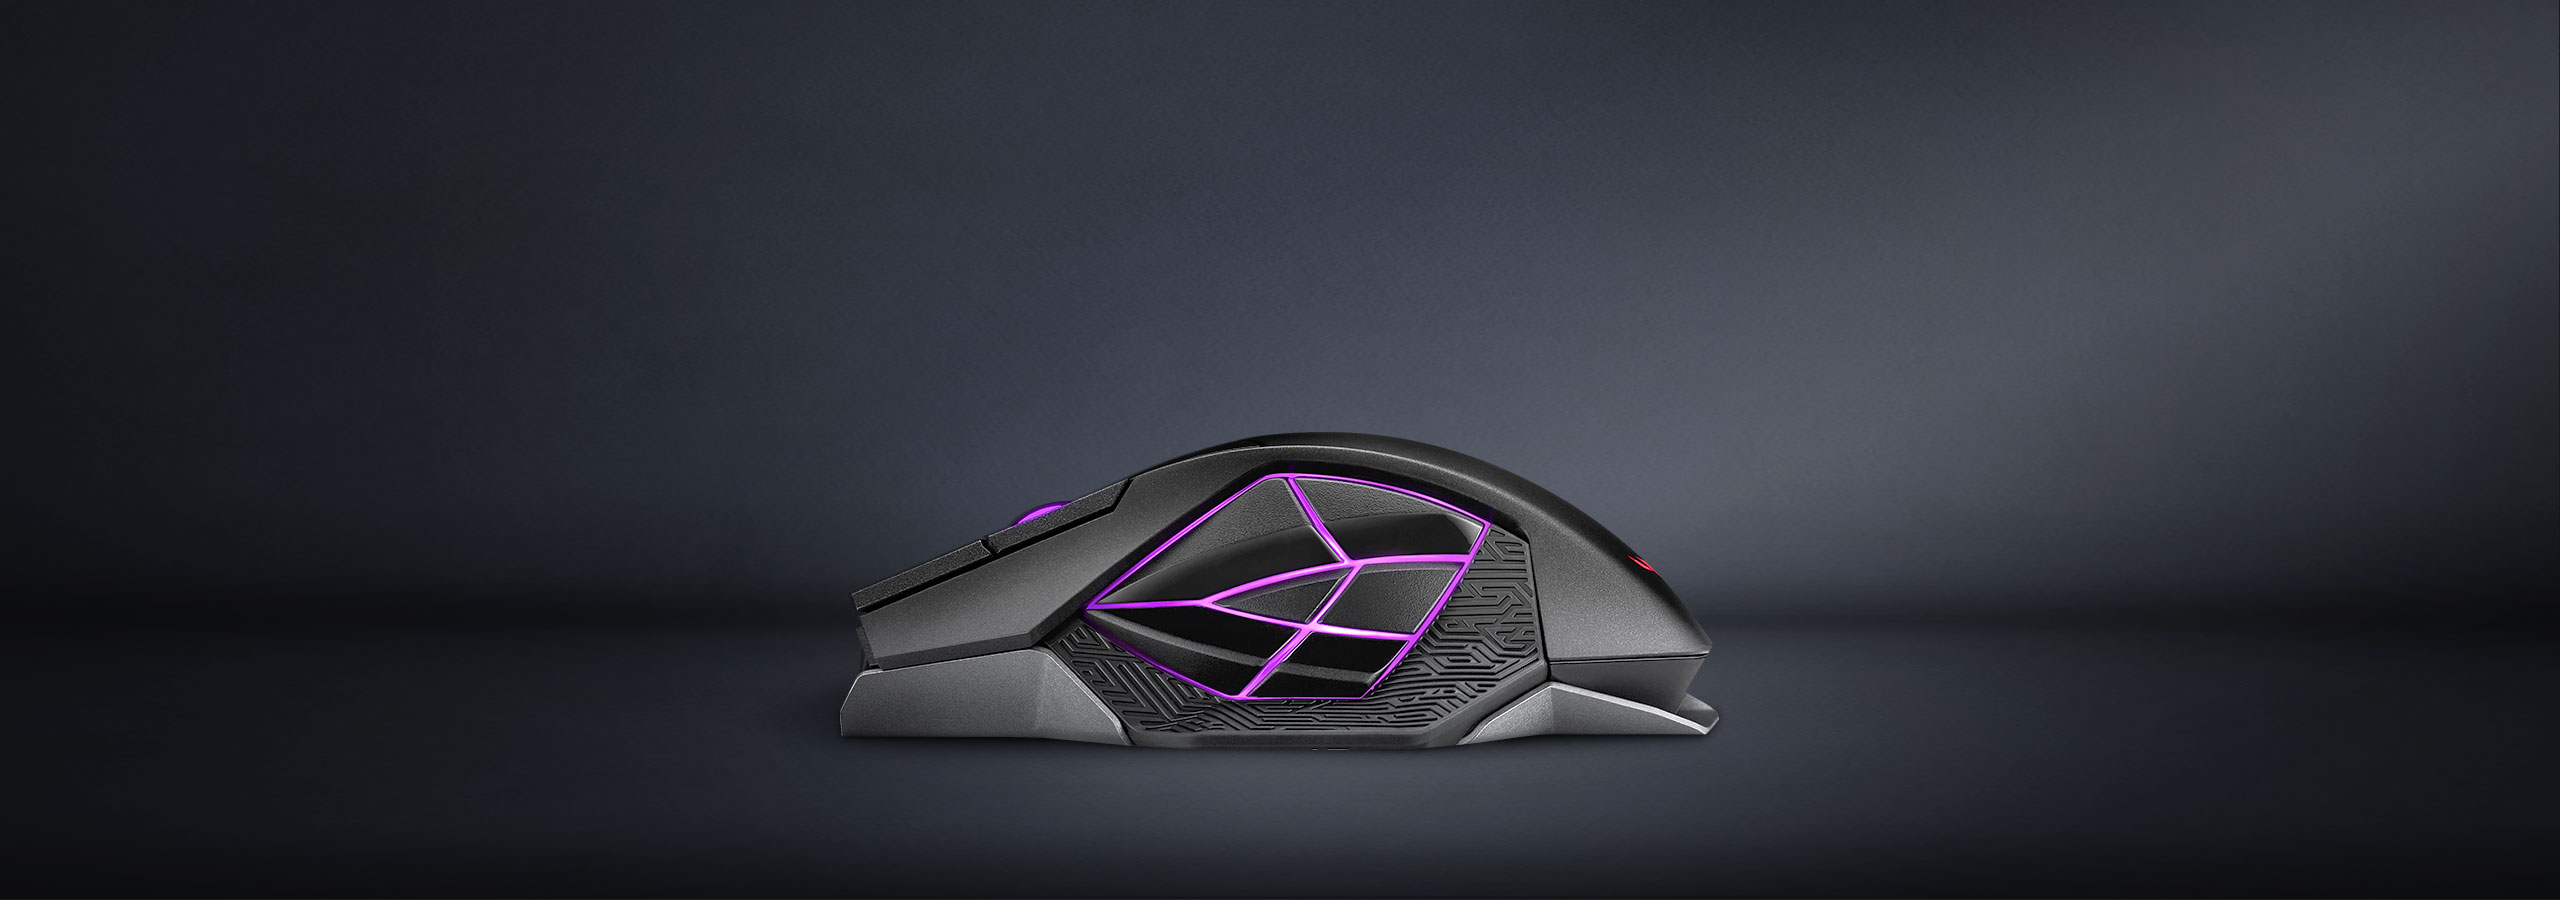 ROG Spatha X features six side buttons with RGB lighting, side view